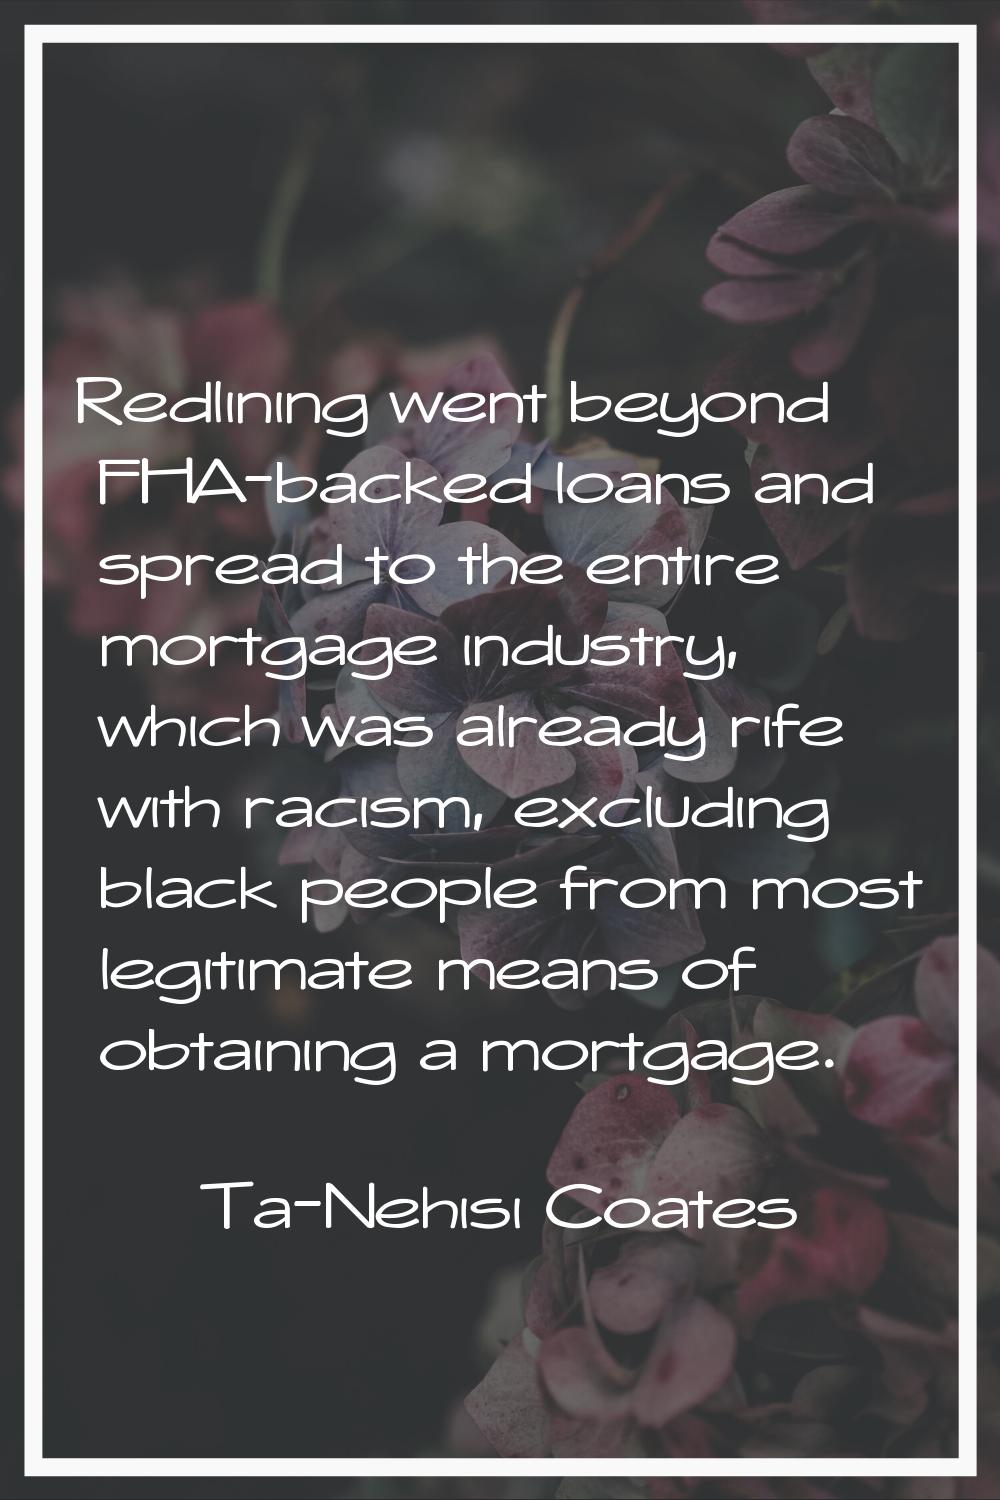 Redlining went beyond FHA-backed loans and spread to the entire mortgage industry, which was alread